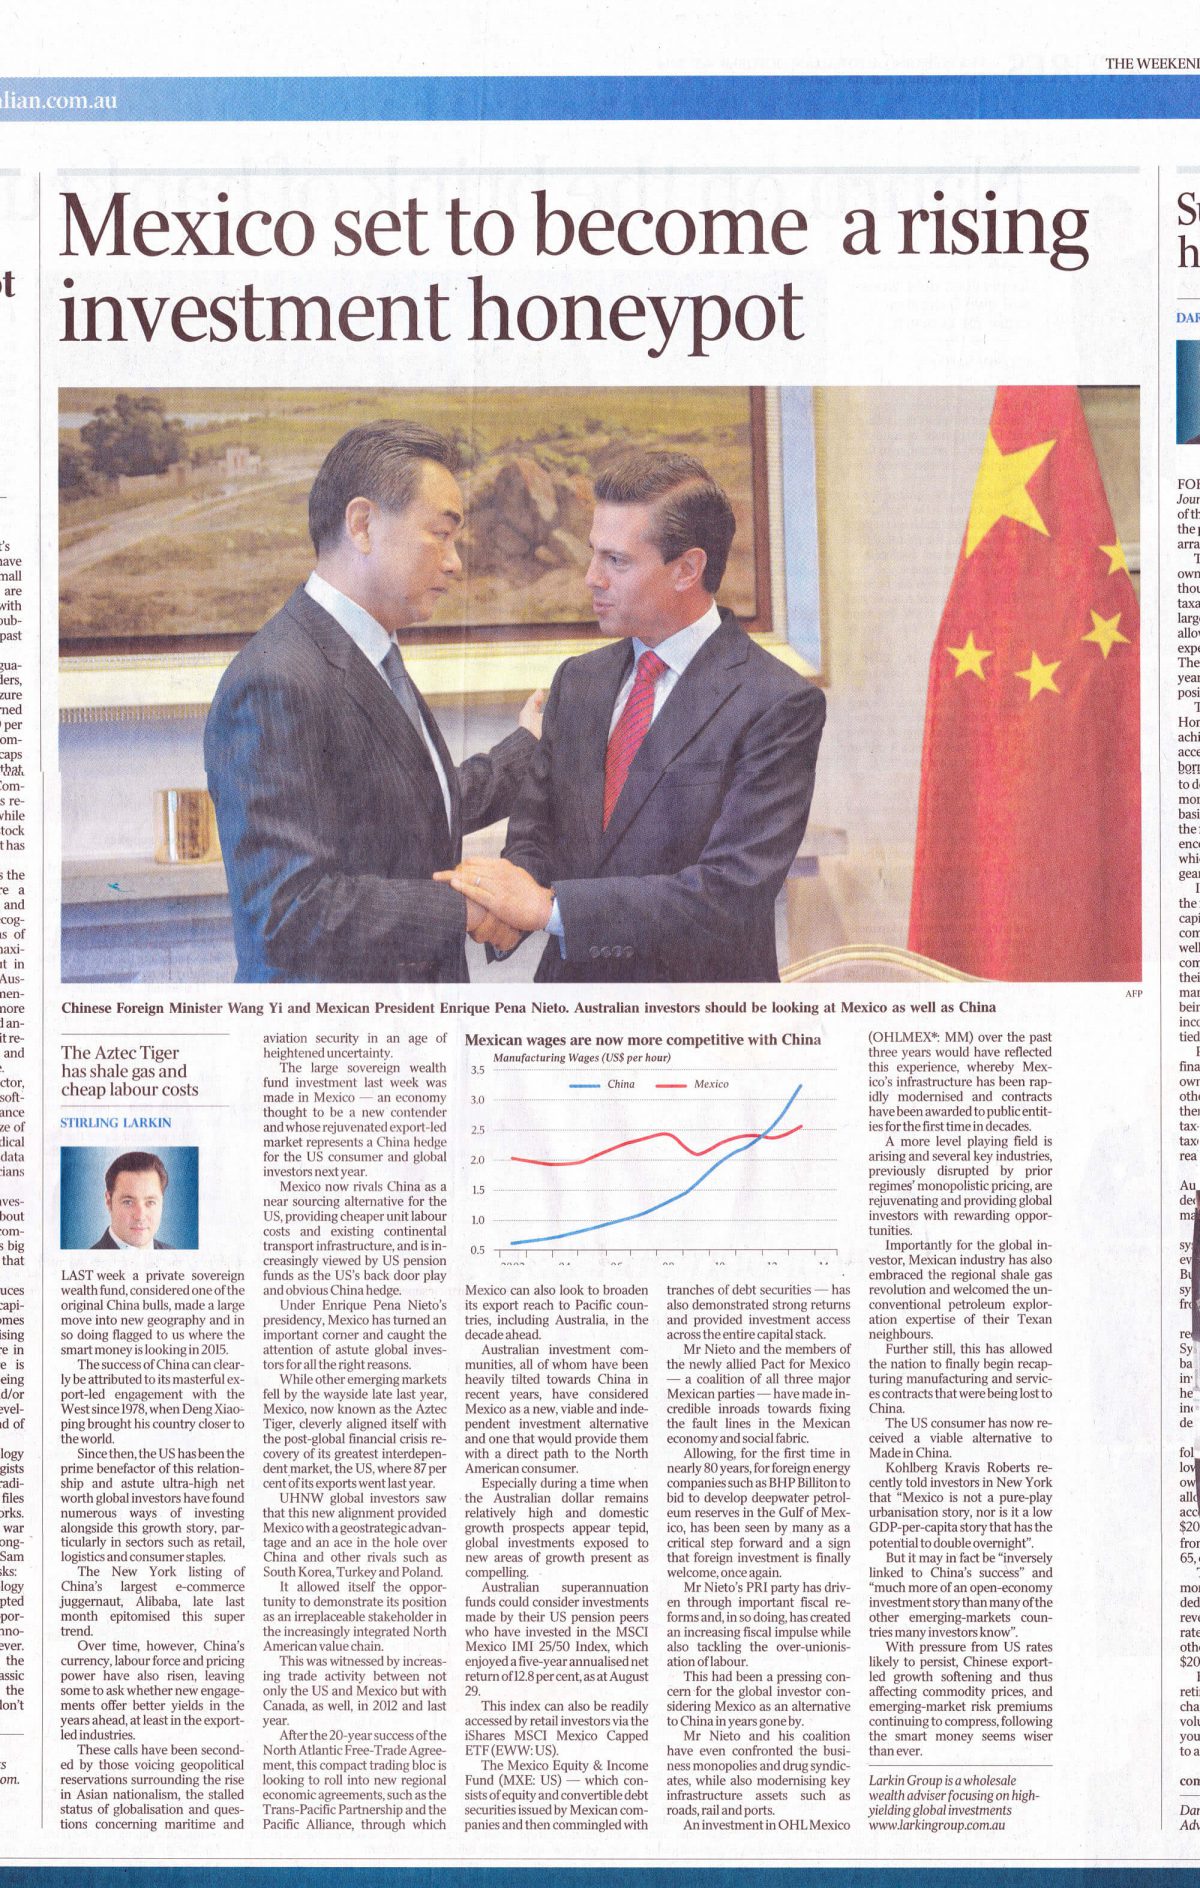 australian standfirst discusses investing in mexico in 2014 in the australian newspaper